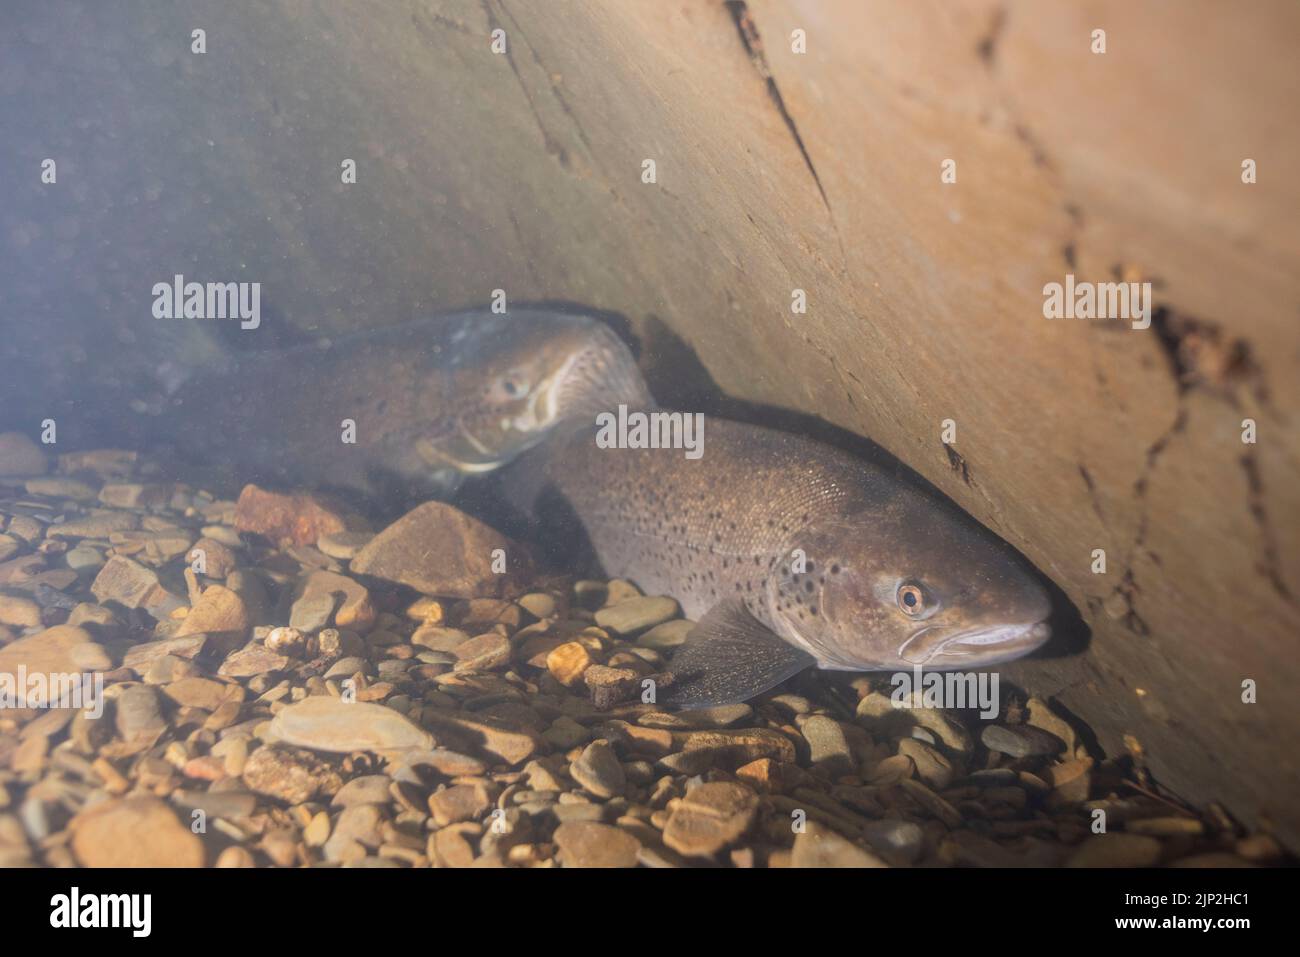 Two sea trout or sewin takes refuge on a deep pool in the River Cothi during the heatwave on the 14th August, 2022. Wales, UK Stock Photo